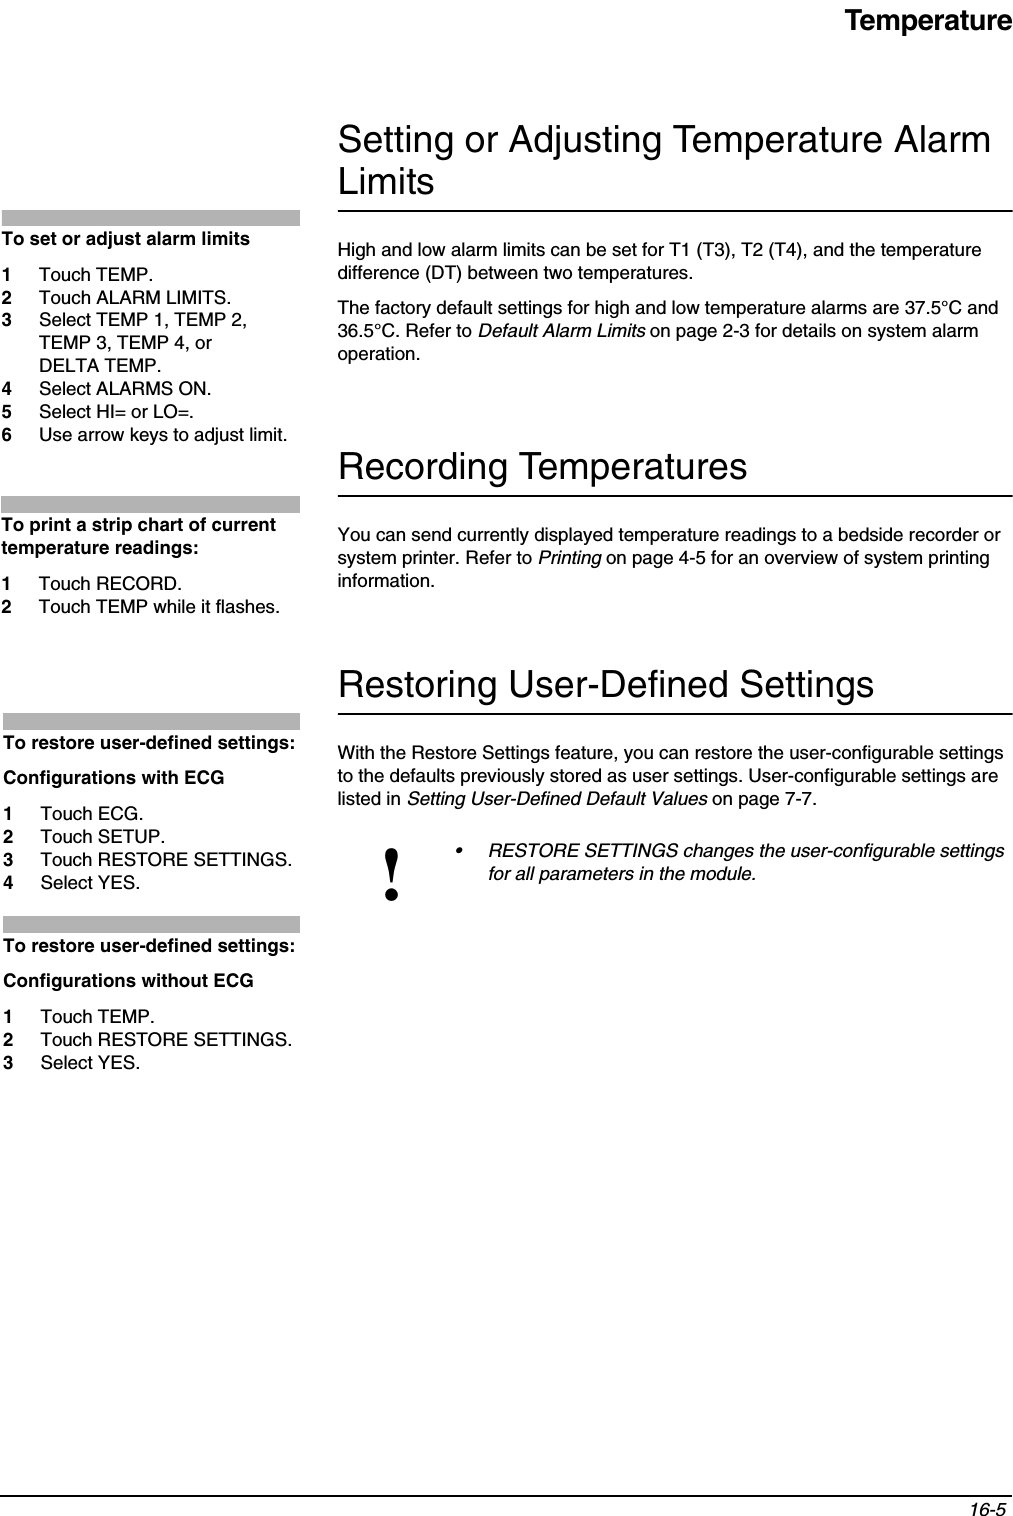 Temperature16-5 Setting or Adjusting Temperature Alarm LimitsHigh and low alarm limits can be set for T1 (T3), T2 (T4), and the temperature difference (DT) between two temperatures.The factory default settings for high and low temperature alarms are 37.5°C and 36.5°C. Refer to Default Alarm Limits on page 2-3 for details on system alarm operation.Recording TemperaturesYou can send currently displayed temperature readings to a bedside recorder or system printer. Refer to Printing on page 4-5 for an overview of system printing information.Restoring User-Defined SettingsWith the Restore Settings feature, you can restore the user-configurable settings to the defaults previously stored as user settings. User-configurable settings are listed in Setting User-Defined Default Values on page 7-7. !• RESTORE SETTINGS changes the user-configurable settings for all parameters in the module.To set or adjust alarm limits1Touch TEMP.2Touch ALARM LIMITS.3Select TEMP 1, TEMP 2, TEMP 3, TEMP 4, or DELTA TEMP.4Select ALARMS ON. 5Select HI= or LO=.6Use arrow keys to adjust limit.To print a strip chart of current temperature readings:1Touch RECORD.2Touch TEMP while it flashes.To restore user-defined settings:Configurations with ECG1Touch ECG.2Touch SETUP.3Touch RESTORE SETTINGS.4Select YES.To restore user-defined settings:Configurations without ECG1Touch TEMP.2Touch RESTORE SETTINGS.3Select YES.